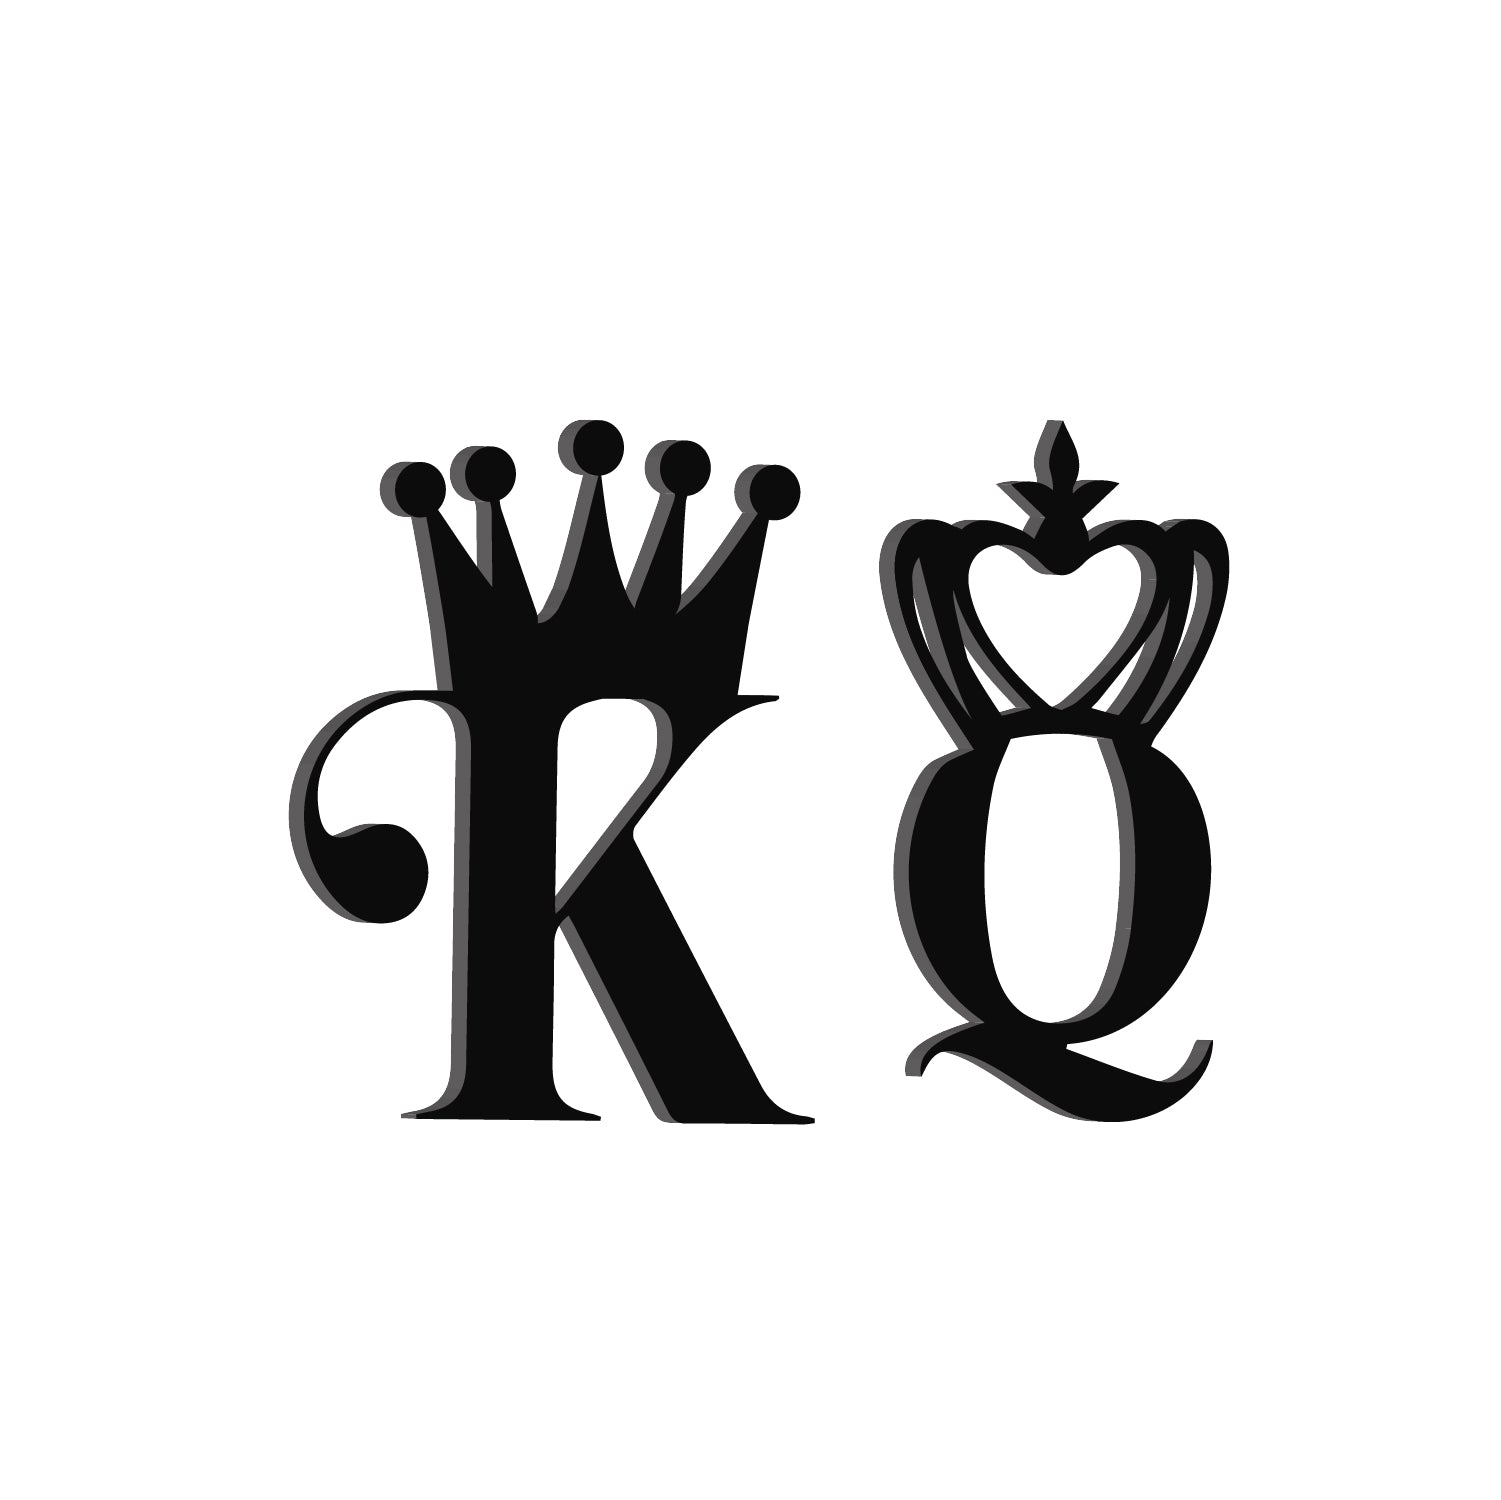 "King And Queen" Love Theme Black Engineered Wood Wall Art Cutout, Ready to Hang Home Décor 4